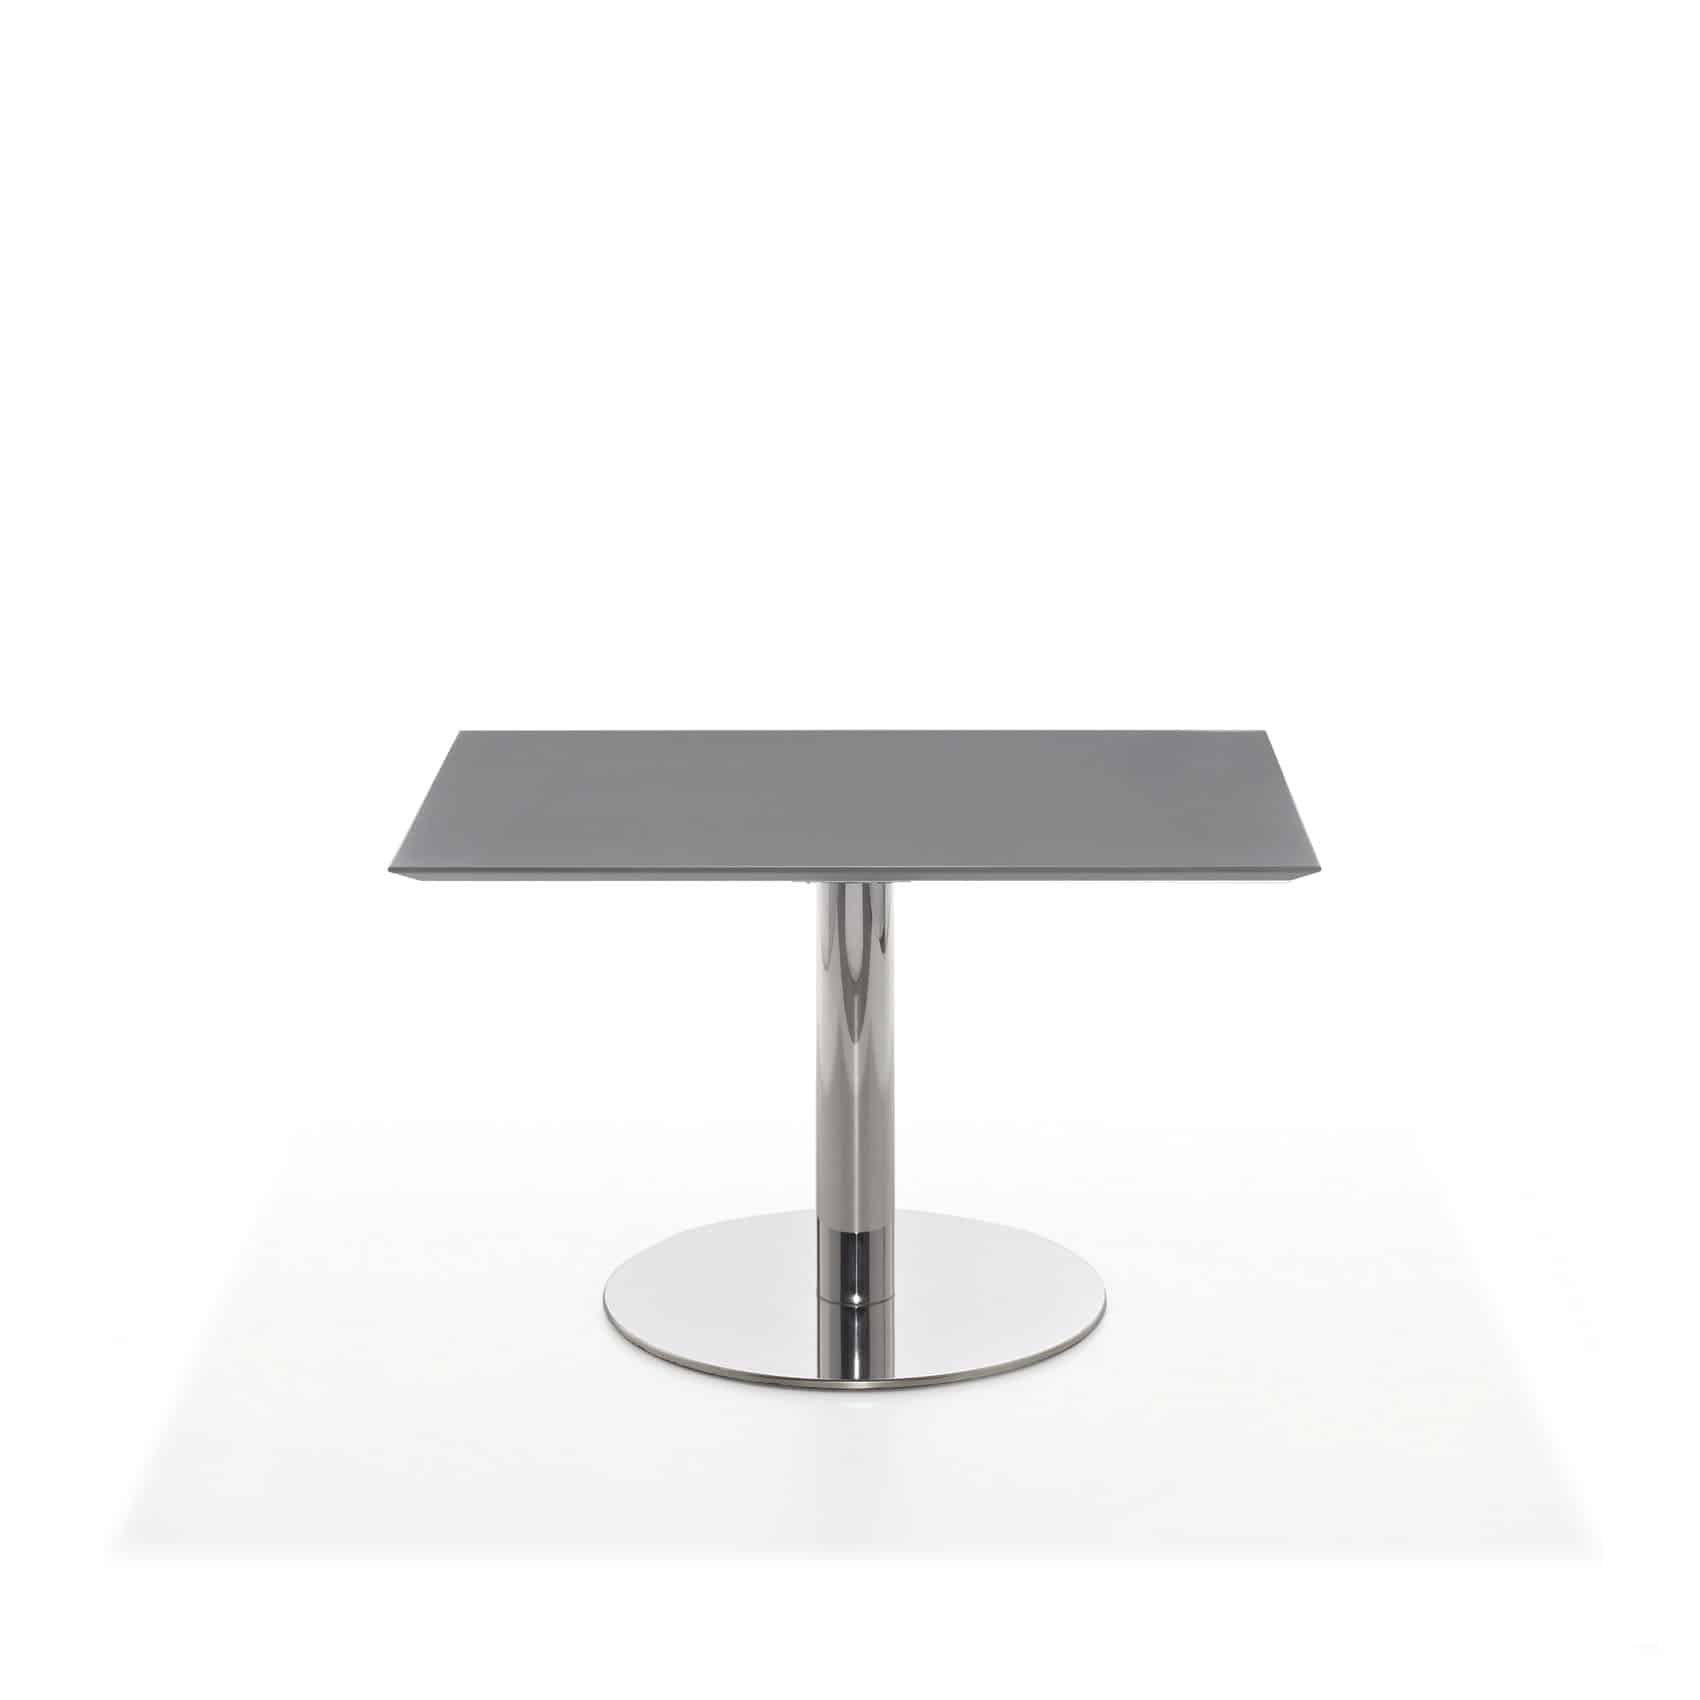 Enzo side table MDF 79 x 79 cm anthracite